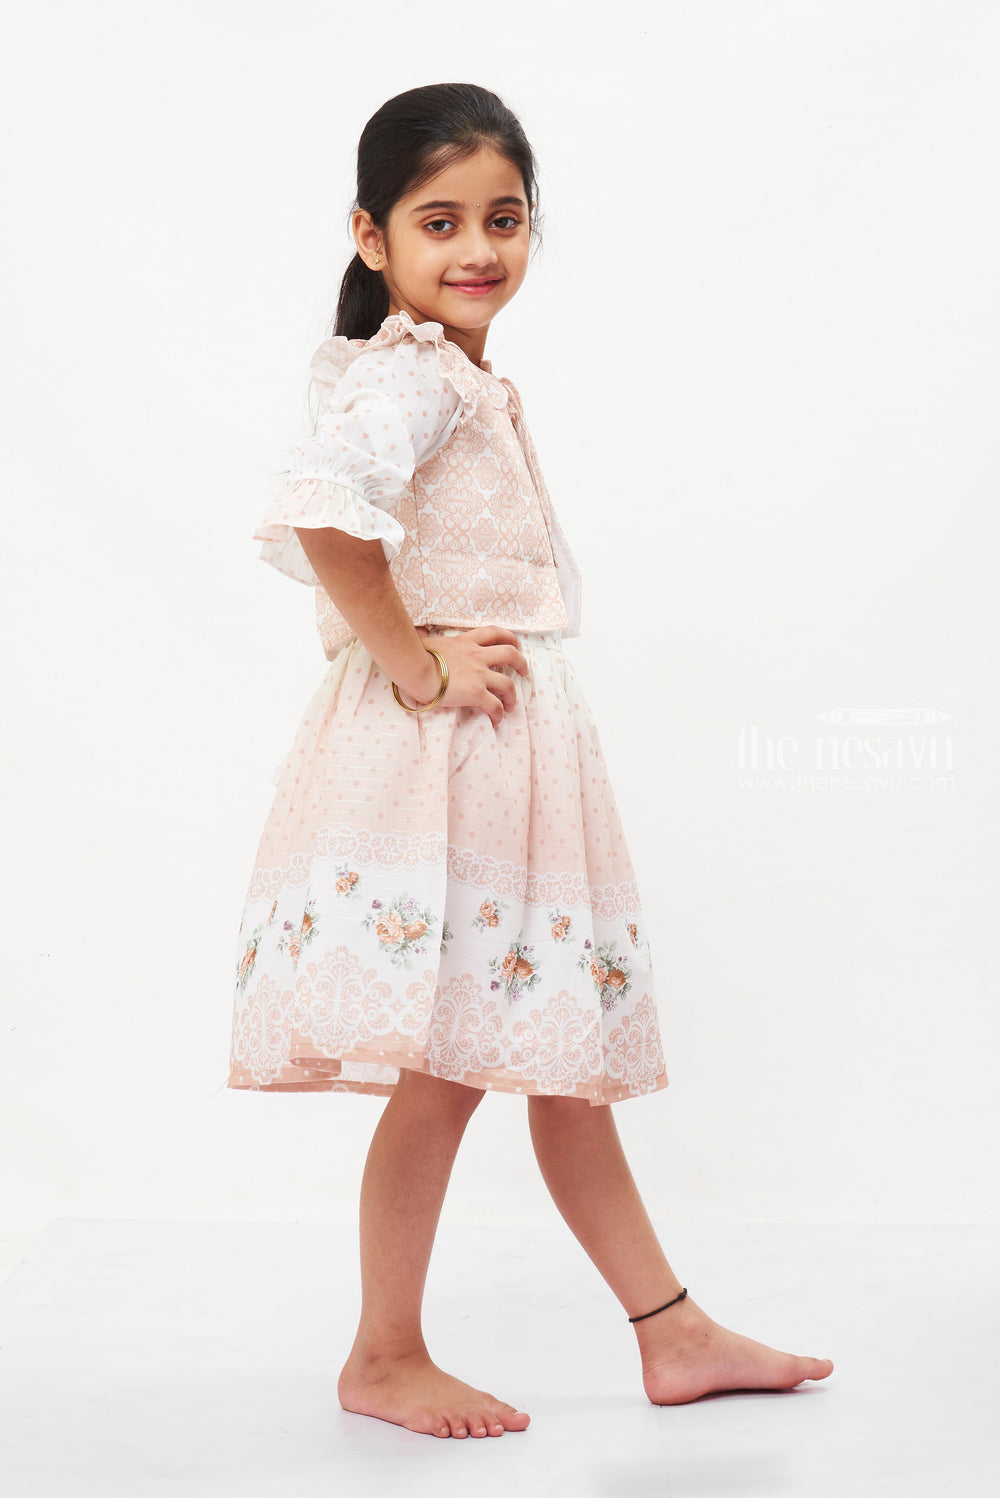 The Nesavu Girls Fancy Frock Beige Floral Lace Fancy Cotton Frock with Sheer Jacket for Girls Nesavu Girls Beige Fancy Lace Frock & Sheer Jacket | Elegant Summer Dress Collection | The Nesavu